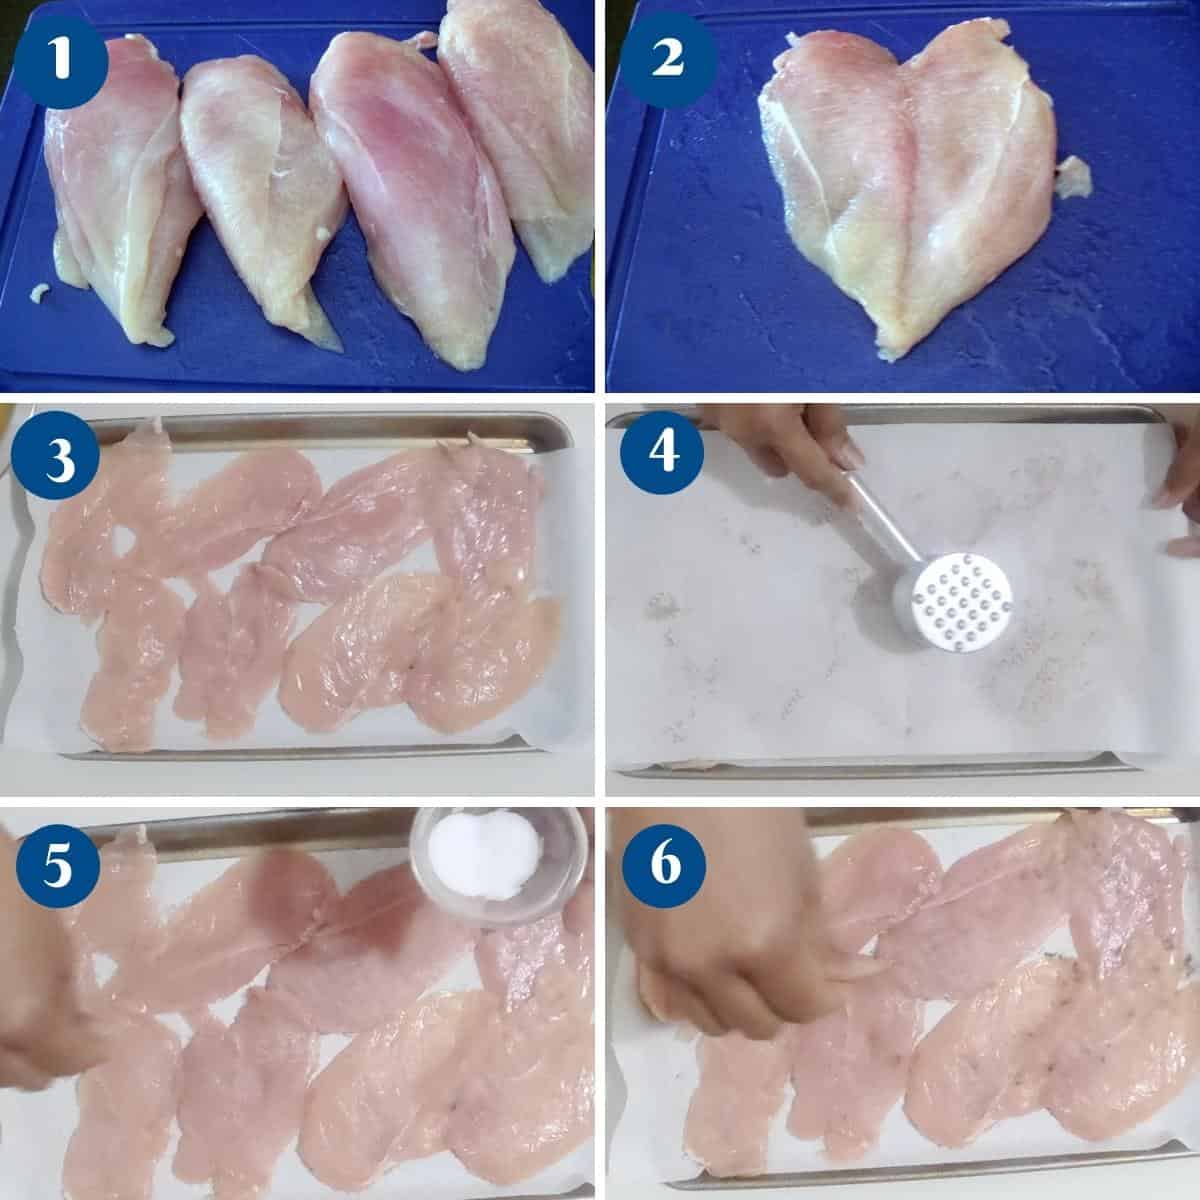 Progress pictures tenderizing the chicken with a meat mallet.